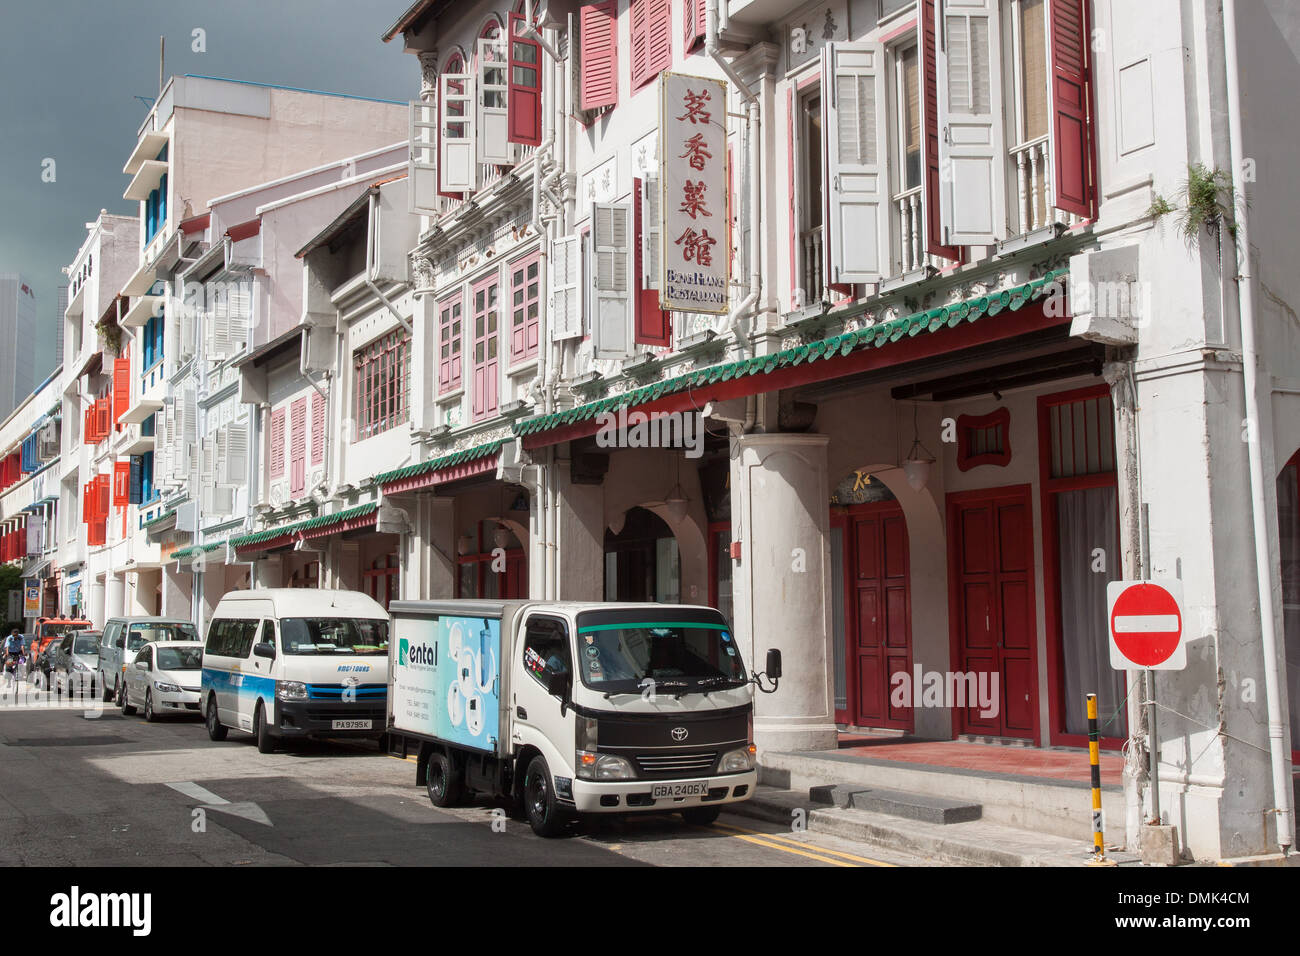 CHINESE SIGNS ON THE FACADES OF TRADITIONAL HOUSES ALONG AMOY STREET, CHINATOWN, SINGAPORE Stock Photo